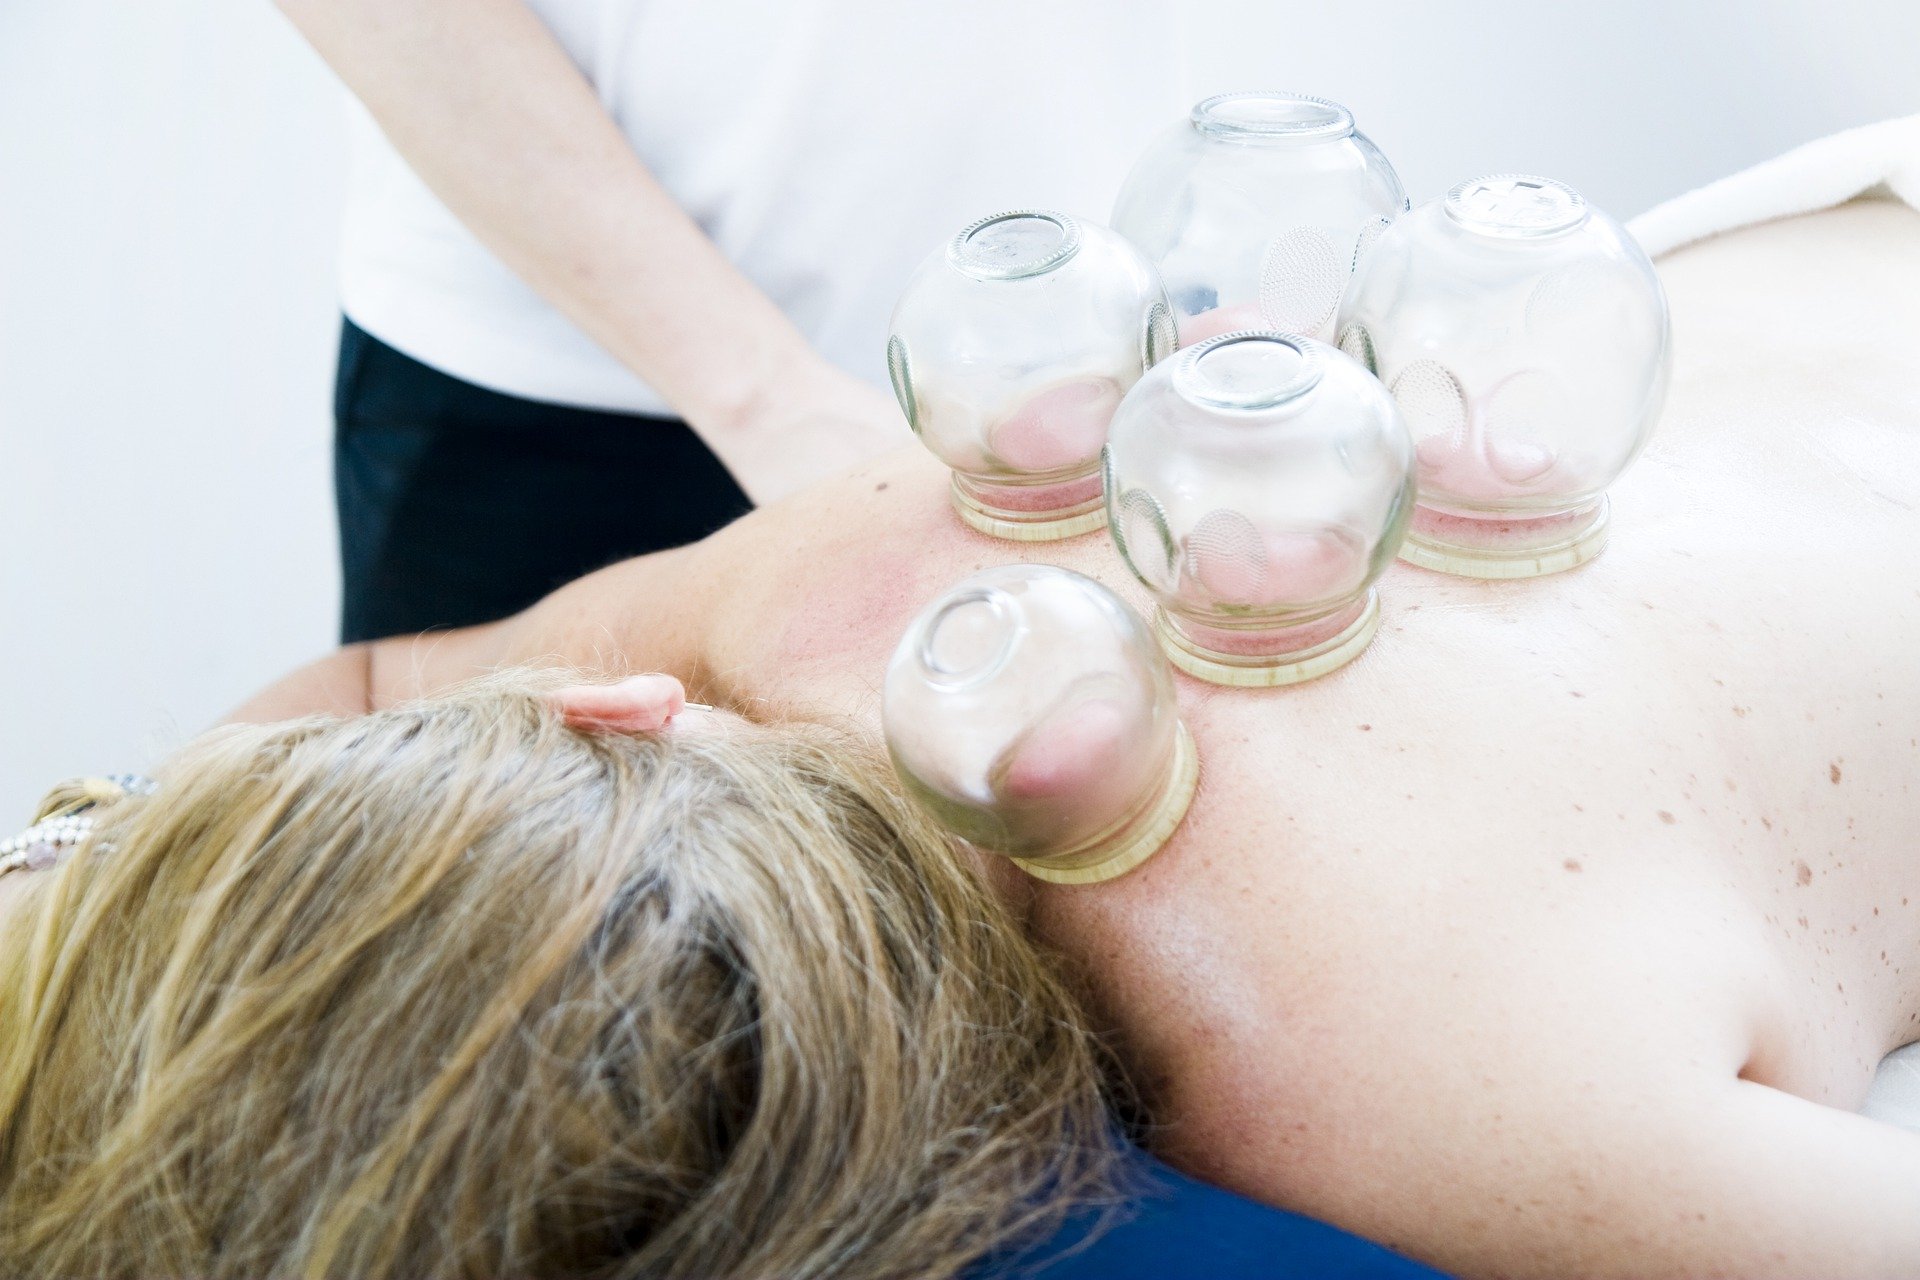 cupping-therapy-g56c093641_1920.jpeg